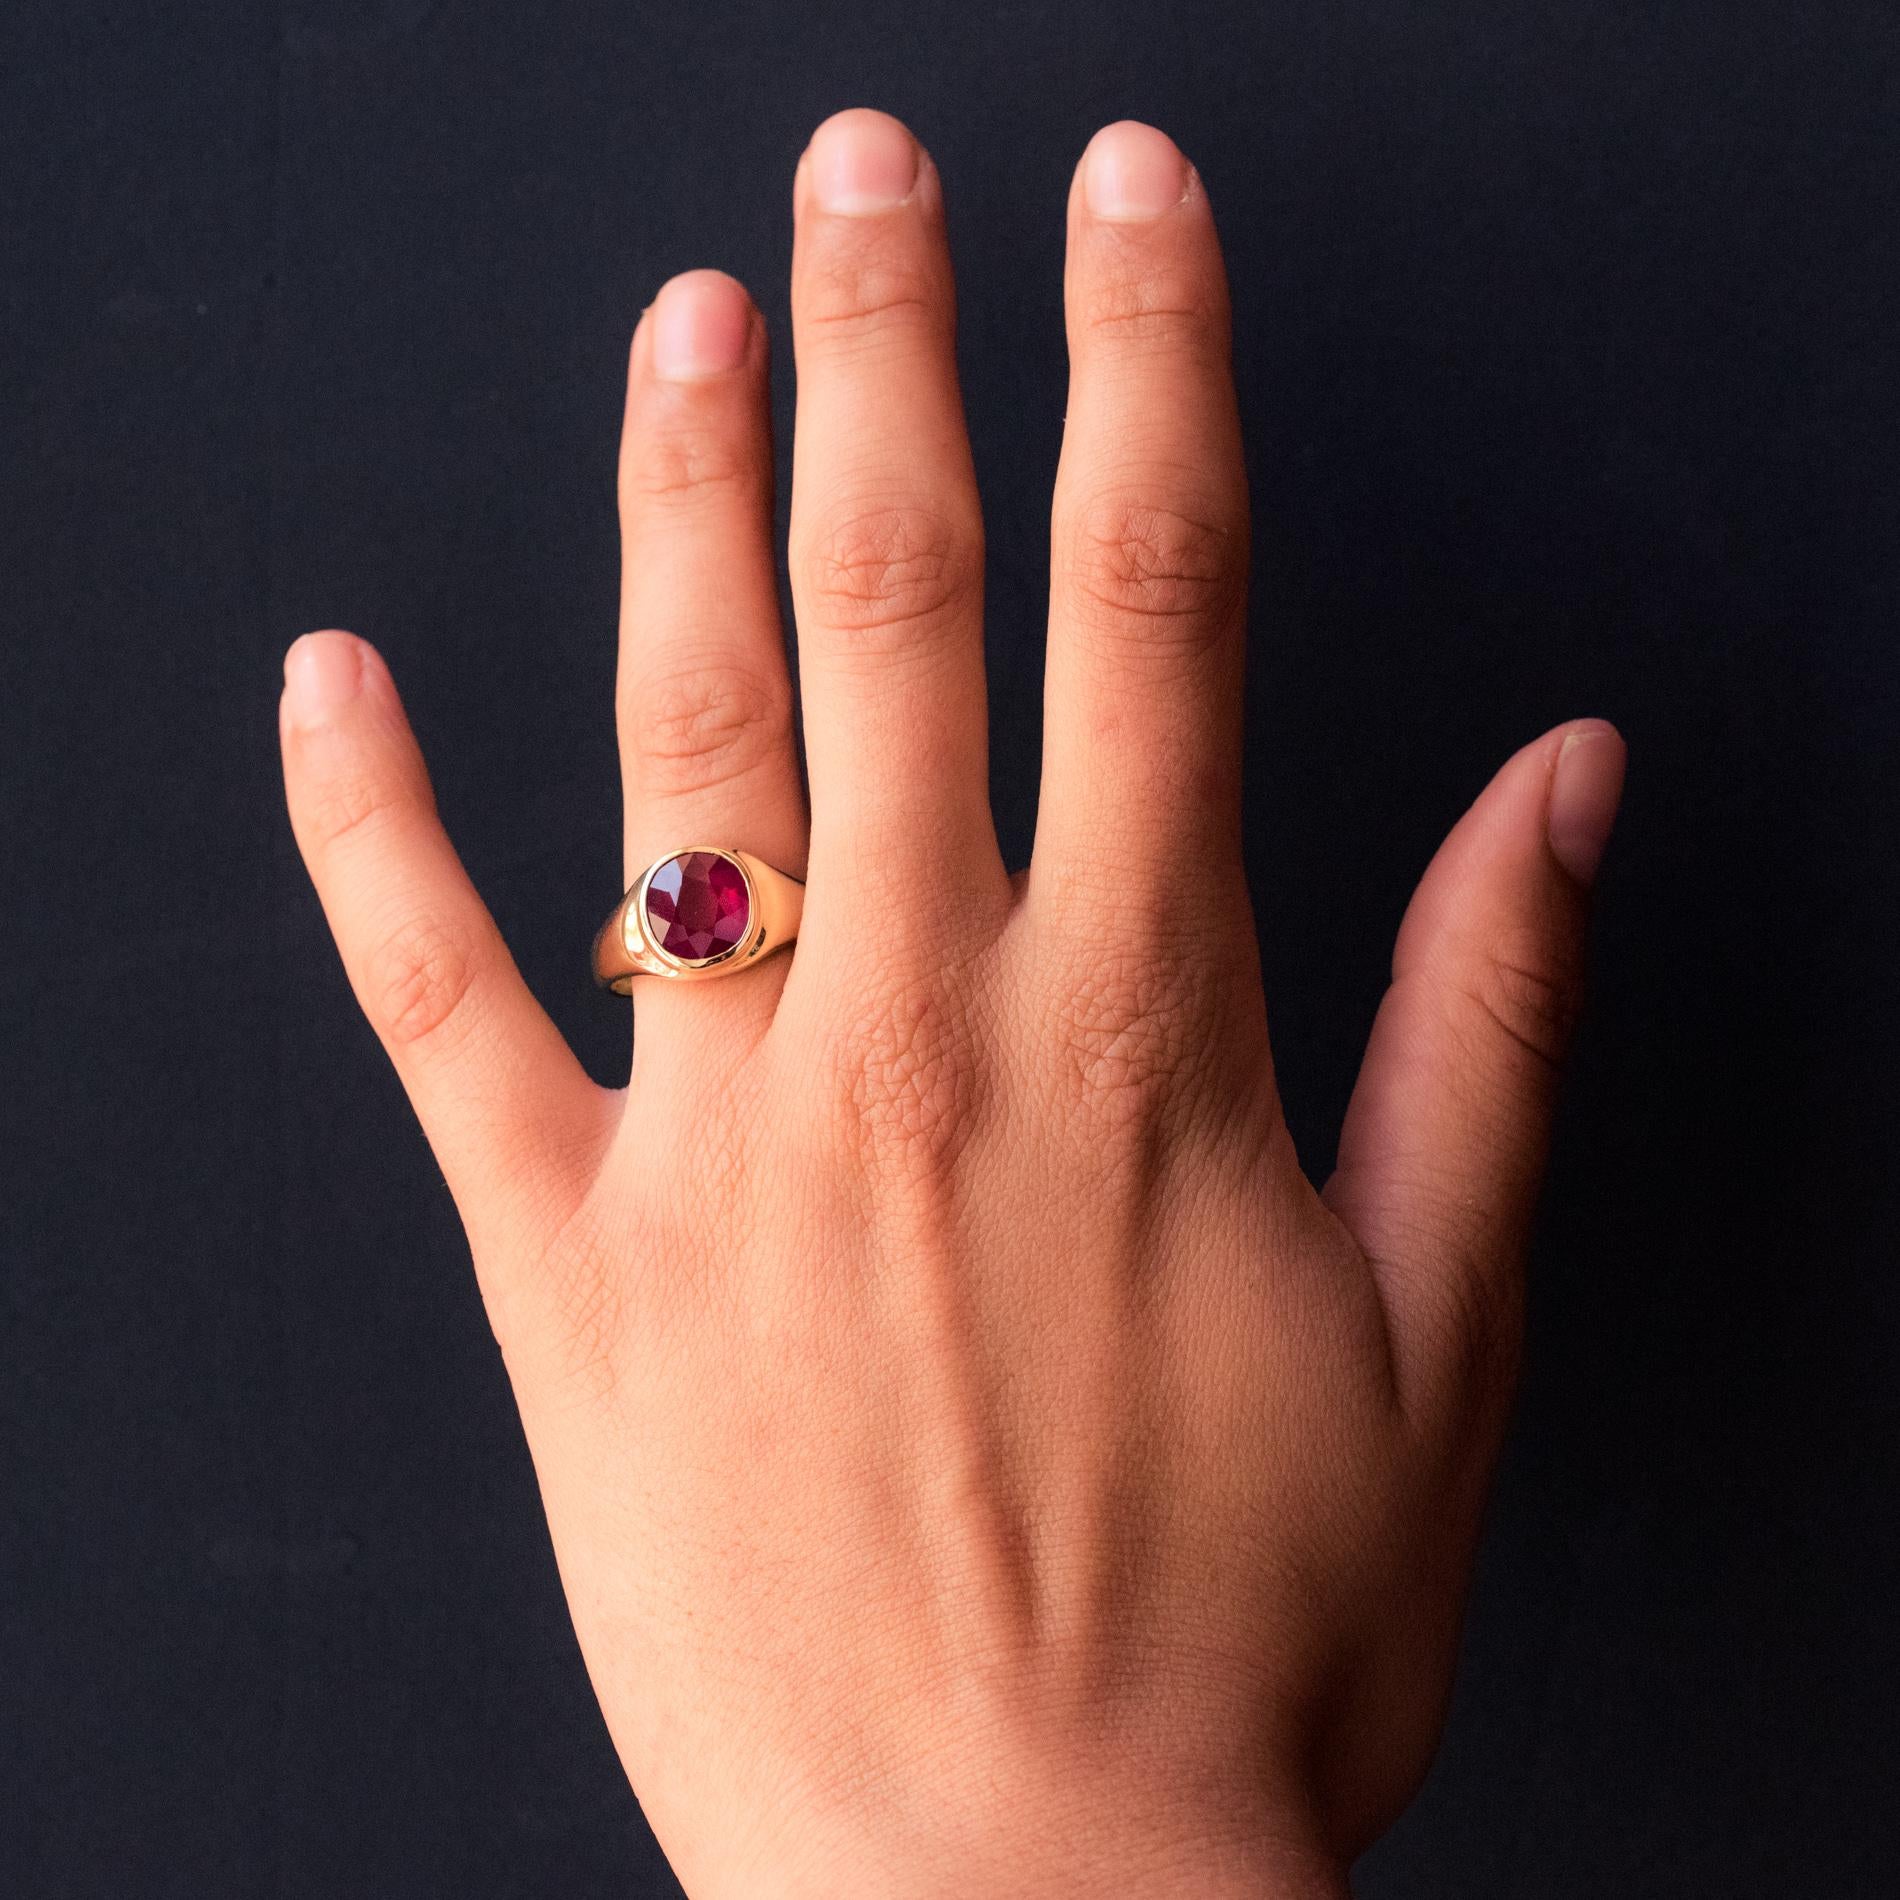 Ring in 18 karat yellow gold.
Magnificent bangle ring, it is closed set on its top with a treated cushion- cut ruby.
Total weight of the ruby: approximately 5.05 carats.
Height: 12.4 mm, width: 10.8 mm, thickness: approximately 4.5 mm, width of the